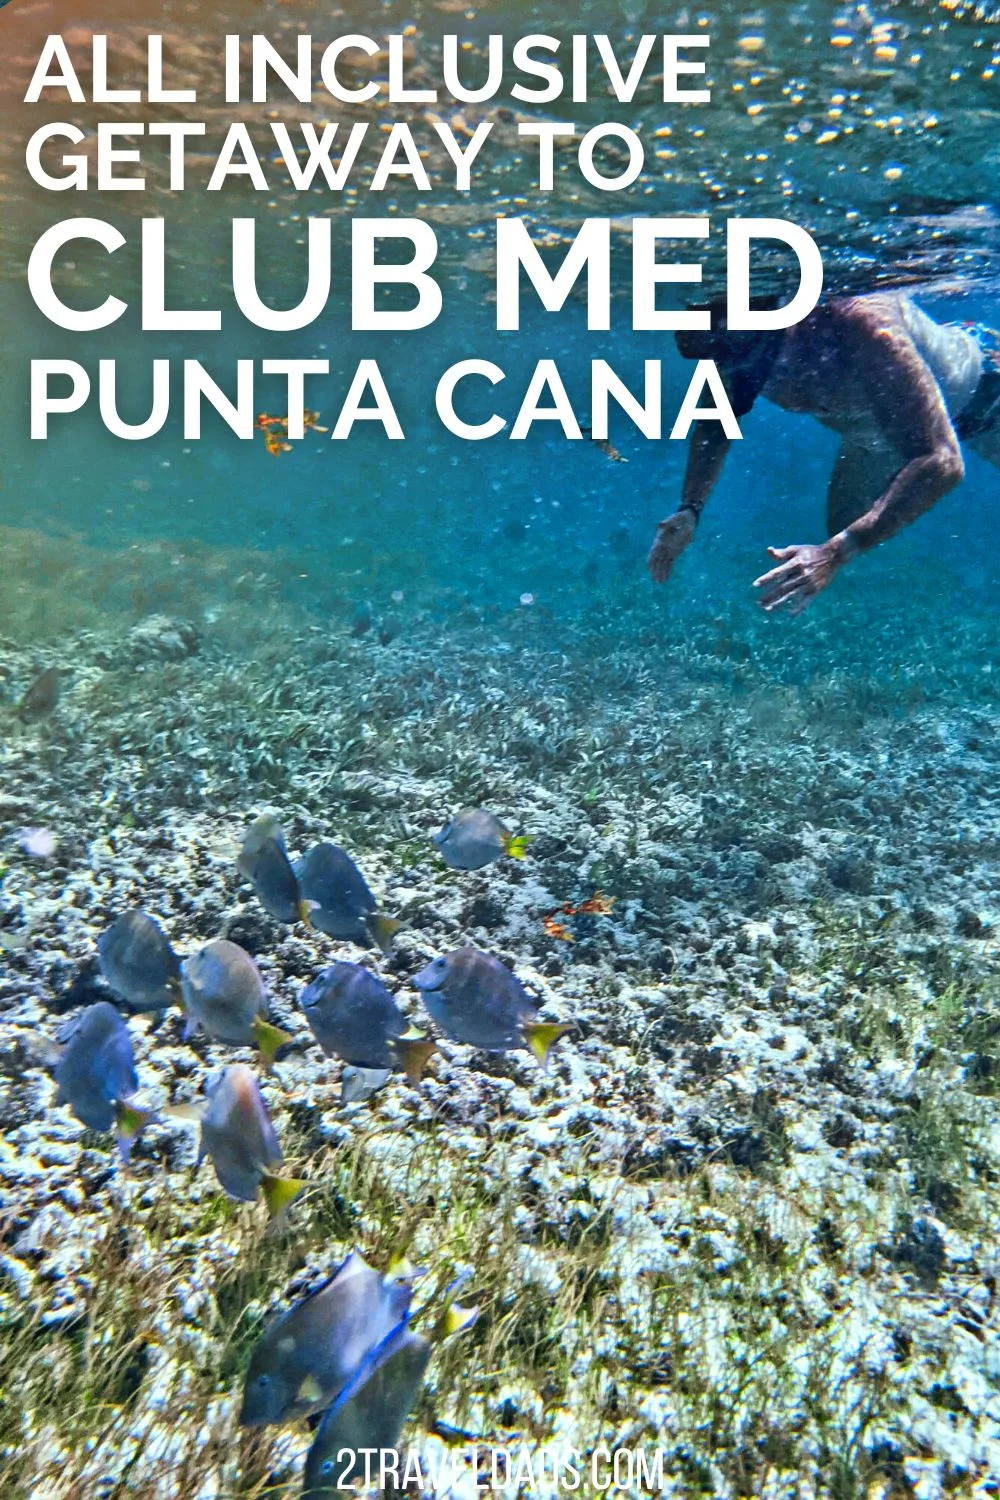 Club Med Punta Cana is a great all-inclusive experience that's ideal for families. With fun amenities, exceptional dining and the best off-beach snorkeling we've had, see what the full experience is like.